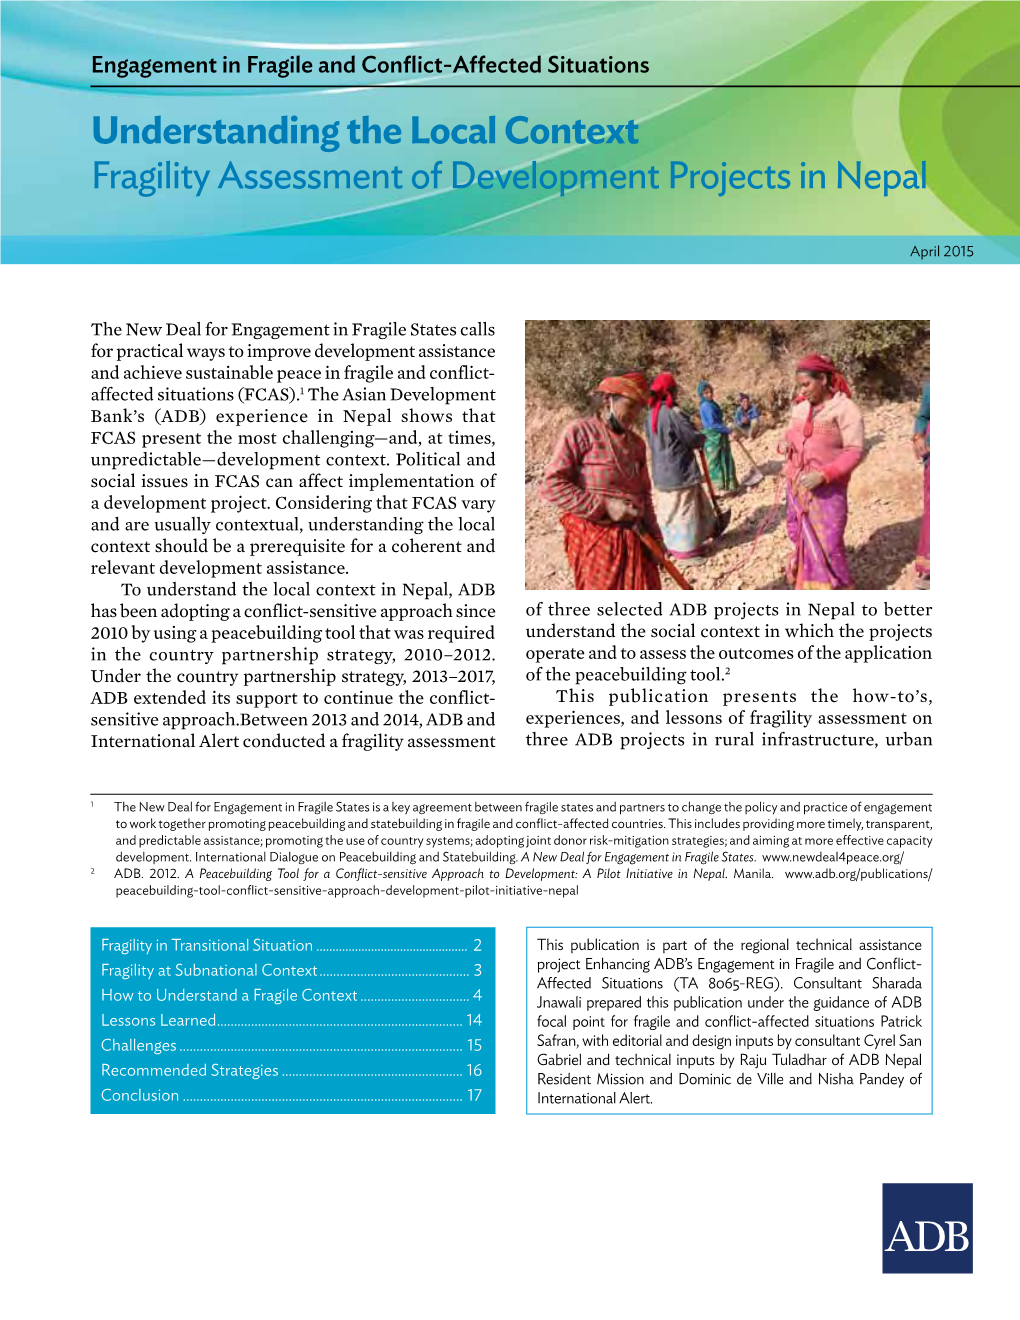 Fragility Assessment of Development Projects in Nepal